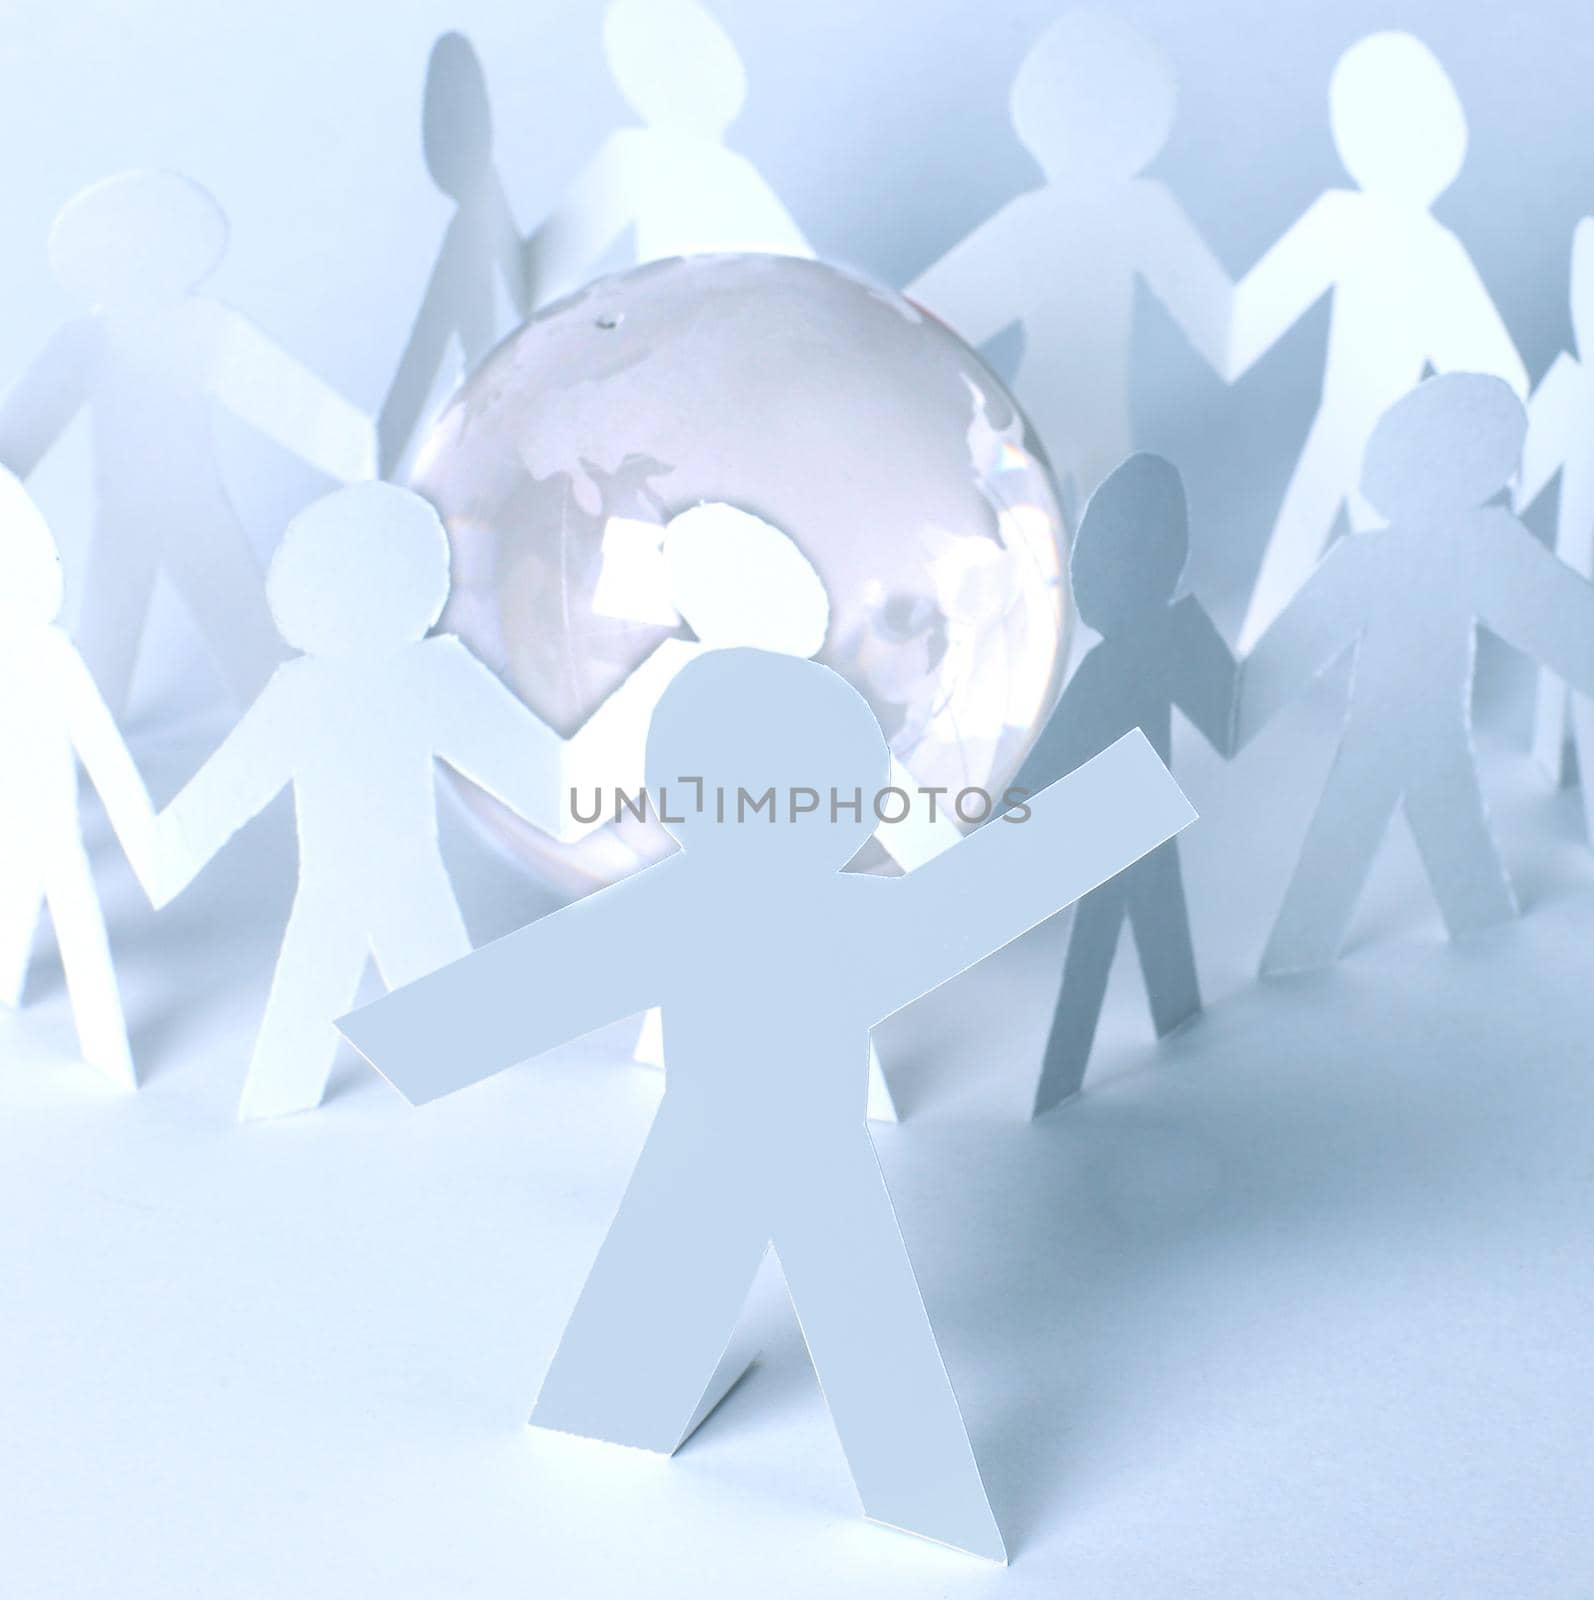 Paper man-leader against the background of paper people with glass globe by SmartPhotoLab